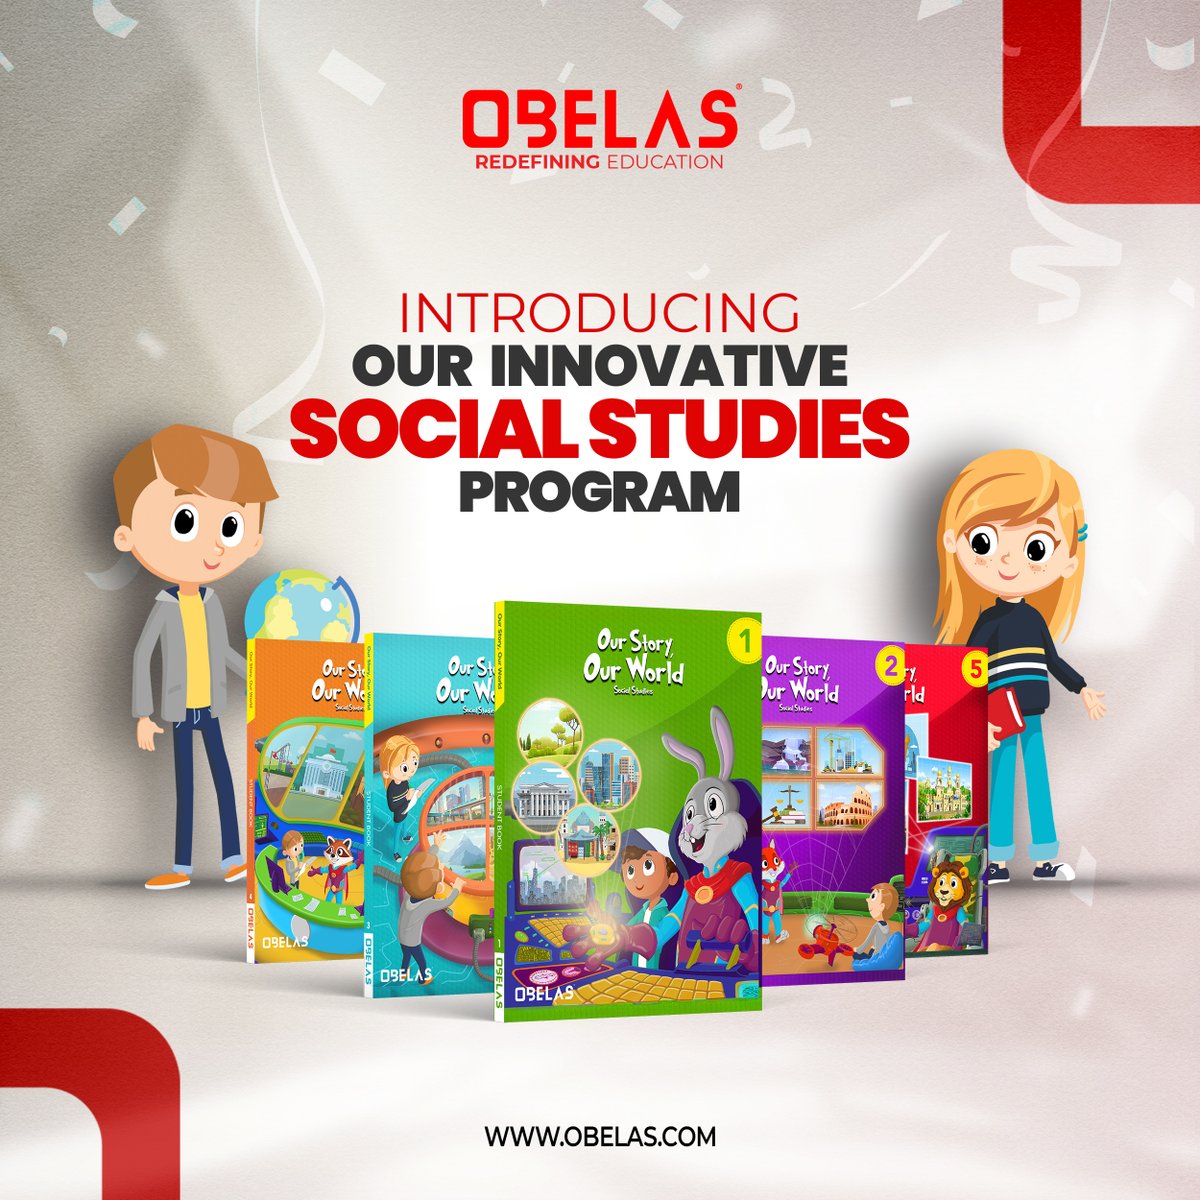 Join Our Story, Our World – the ultimate social studies program for grades 1-5! 🎉 
Explore time and space, unlocking mysteries toward an exhilarating future! 💫 Each lesson sparks excitement as students uncover the world's secrets! 🌍
#OBELAS #SocialStudies